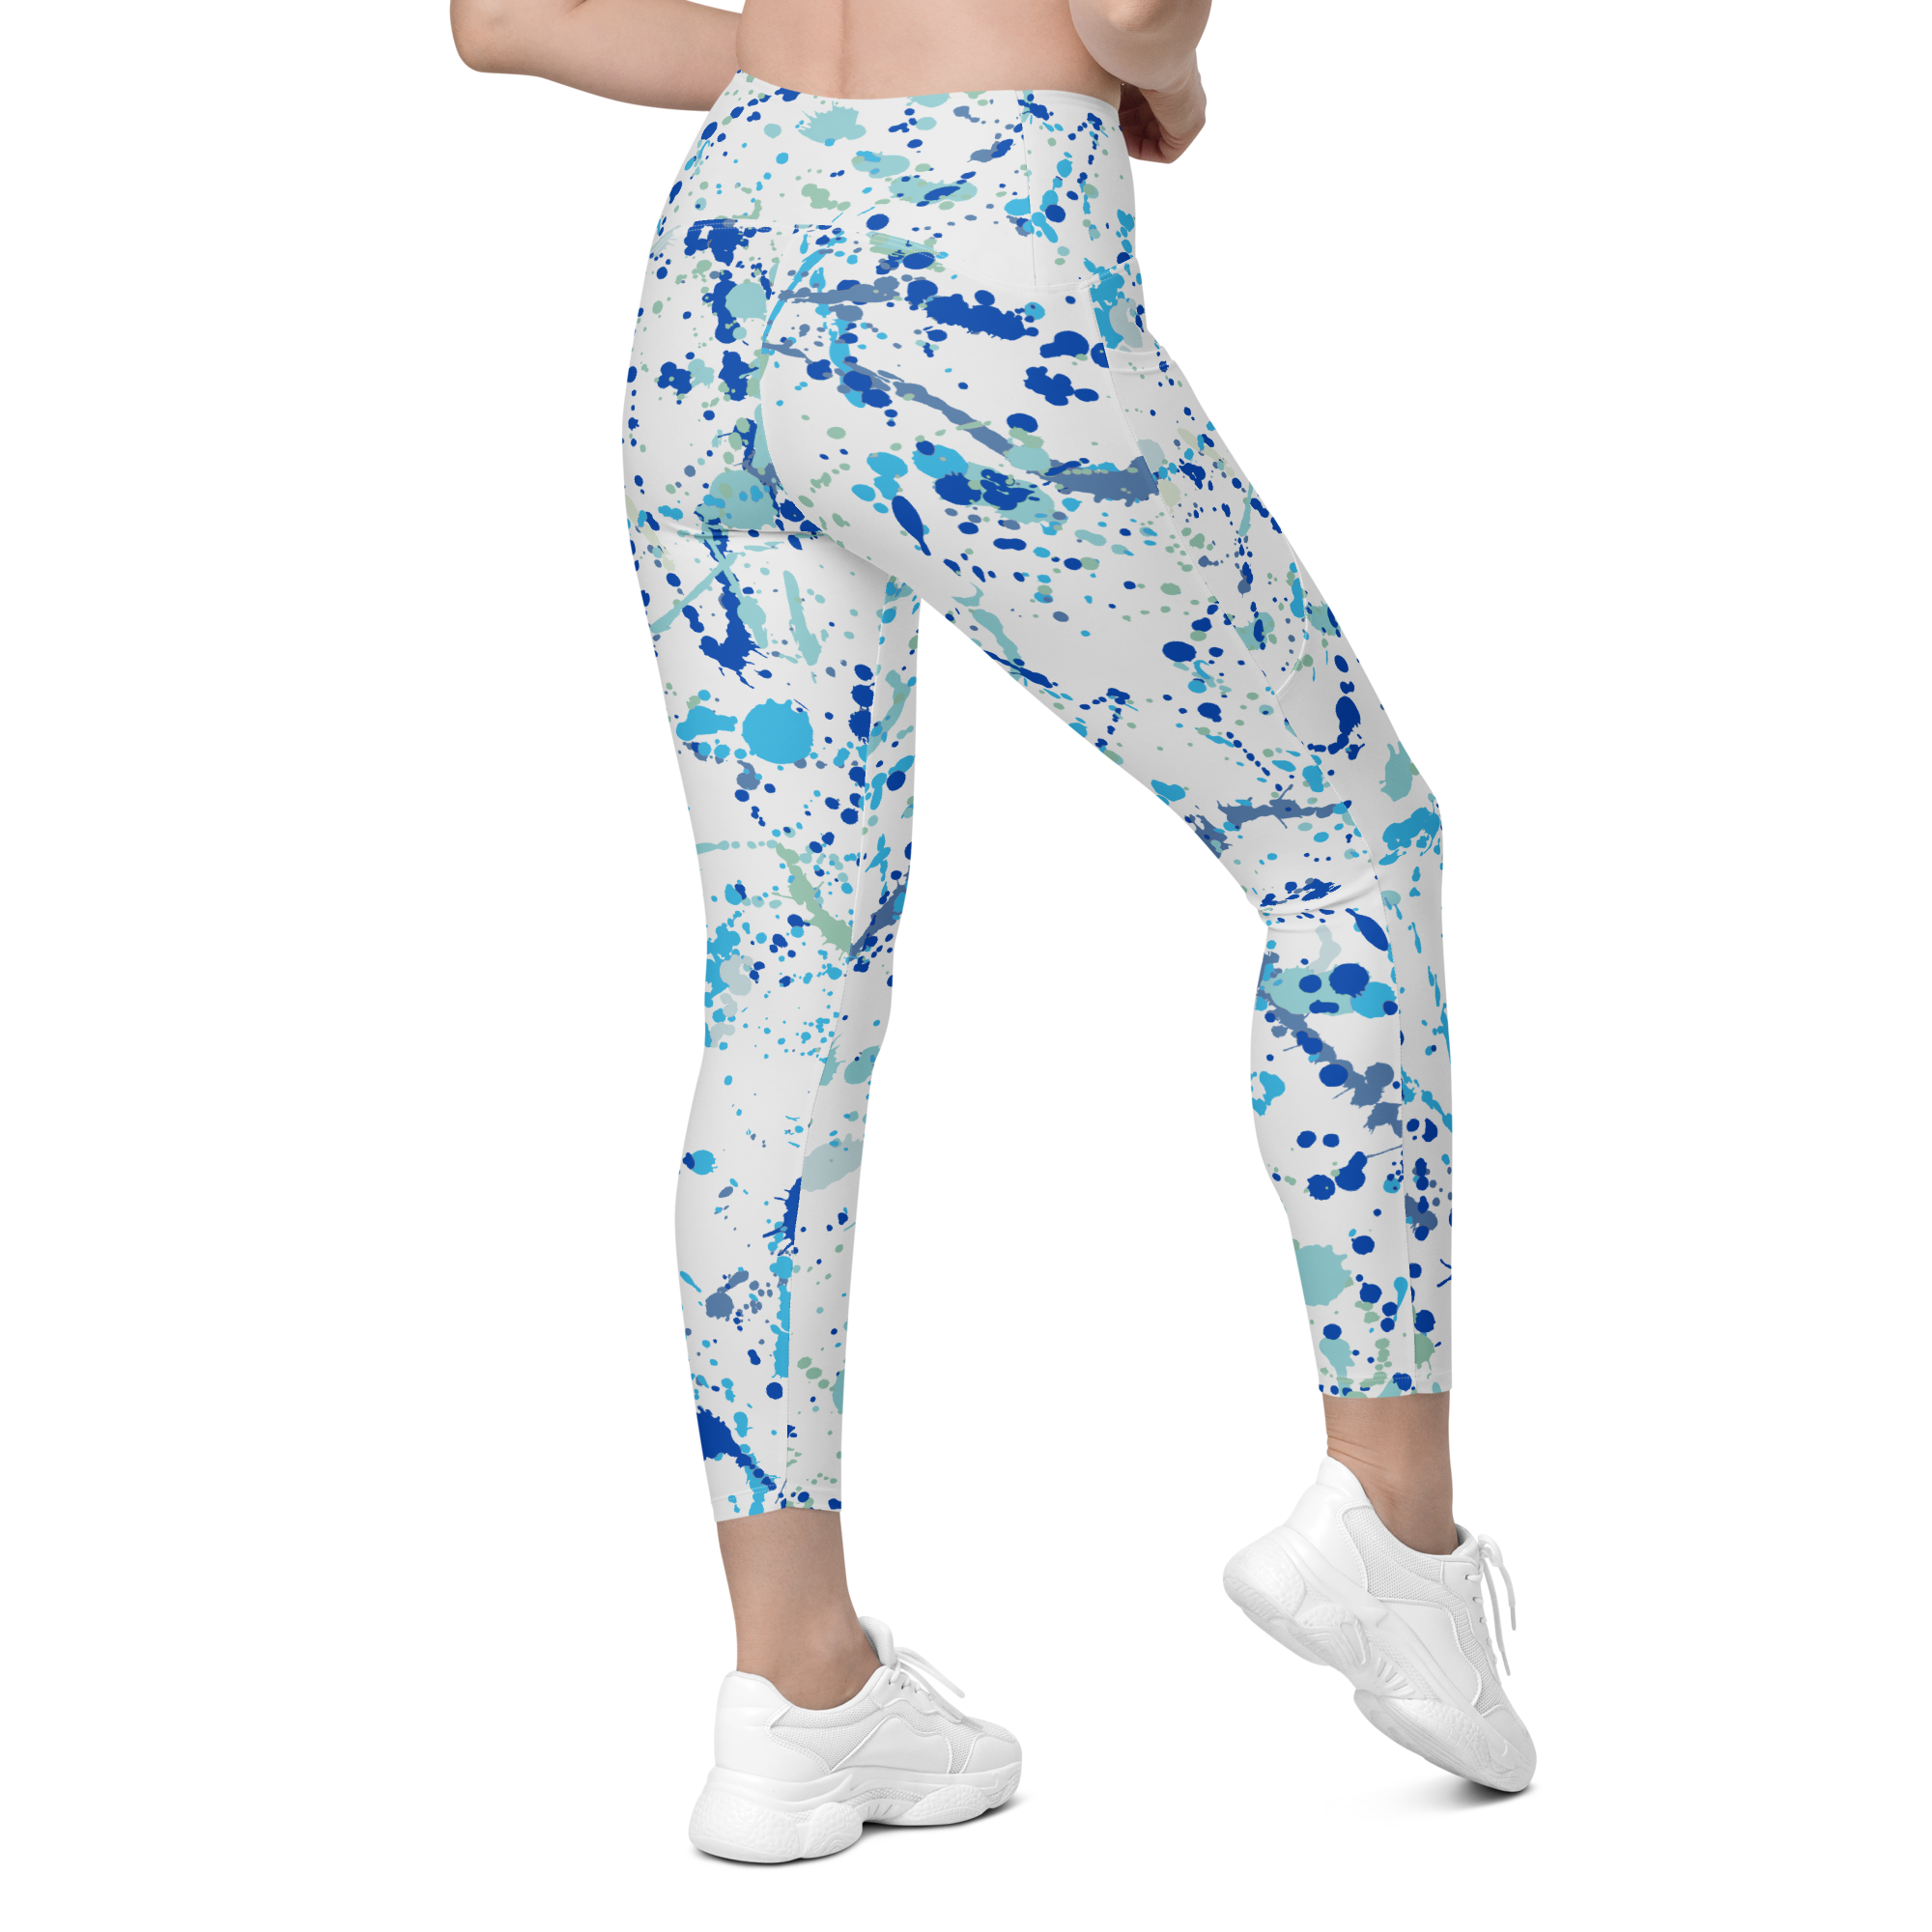 Just Dropped! Chakra 4 Leggings with pockets